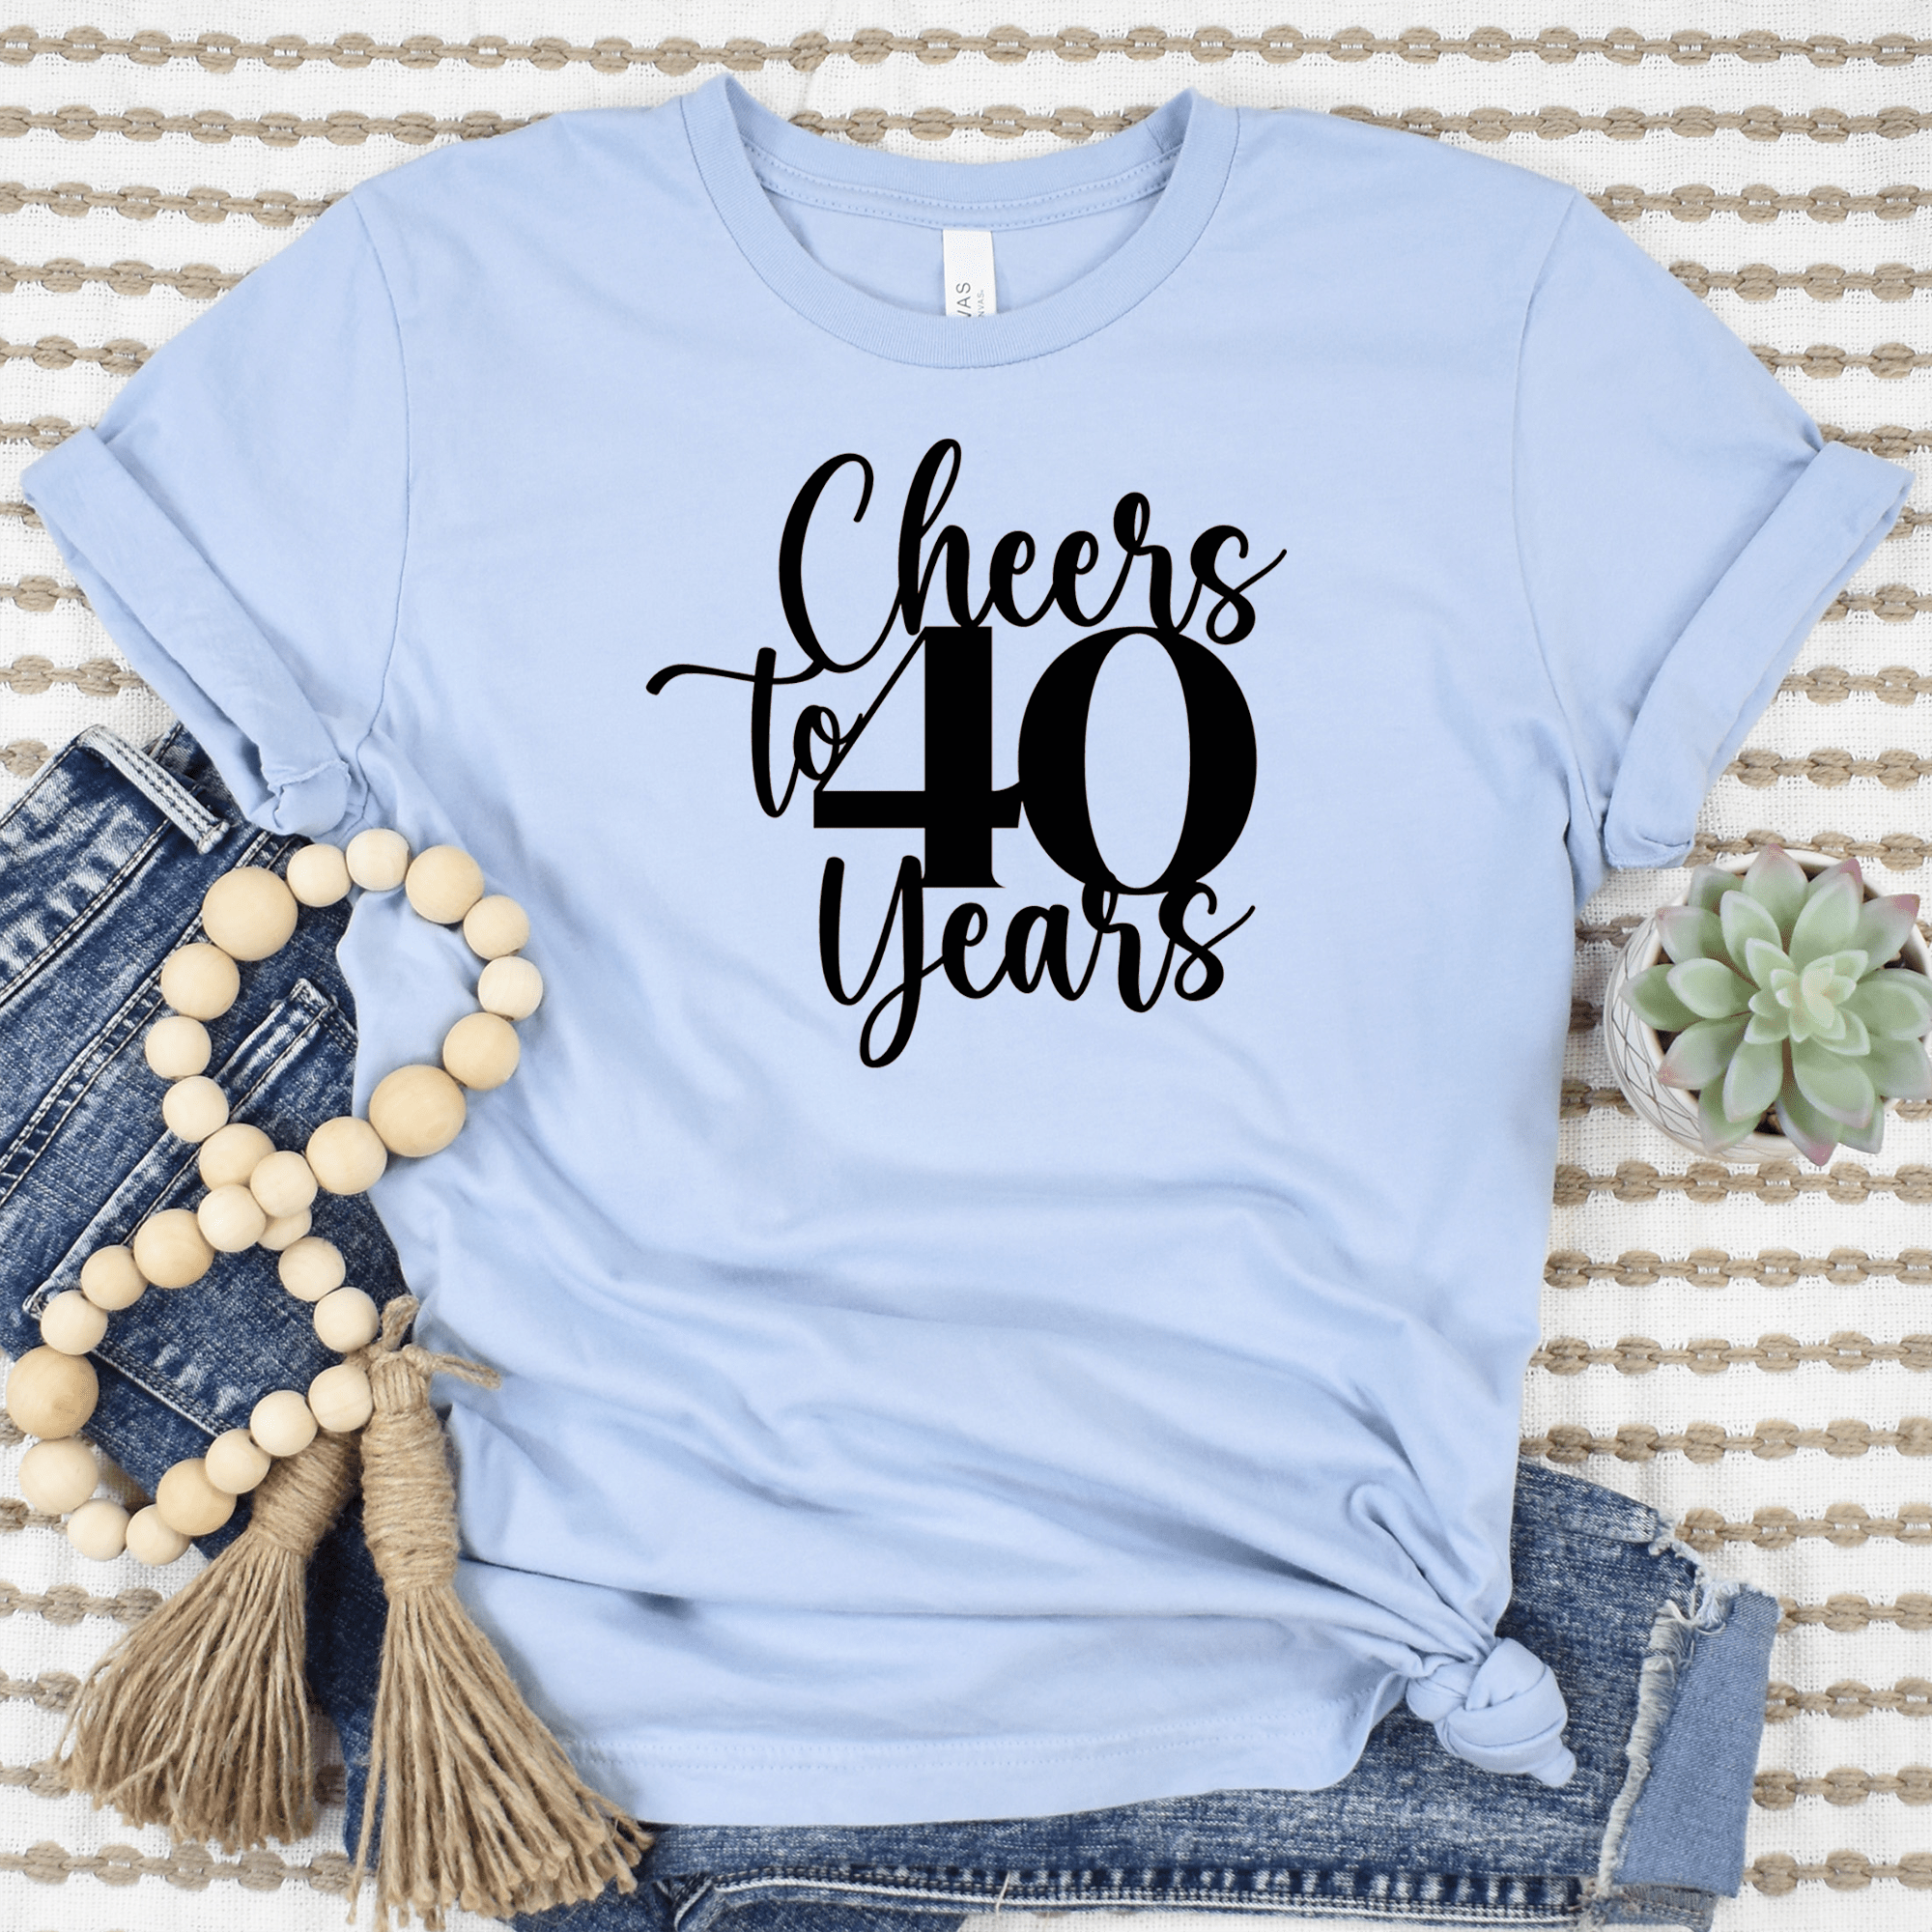 Womens Light Blue T Shirt with Cheers-To-Fourty-Years design